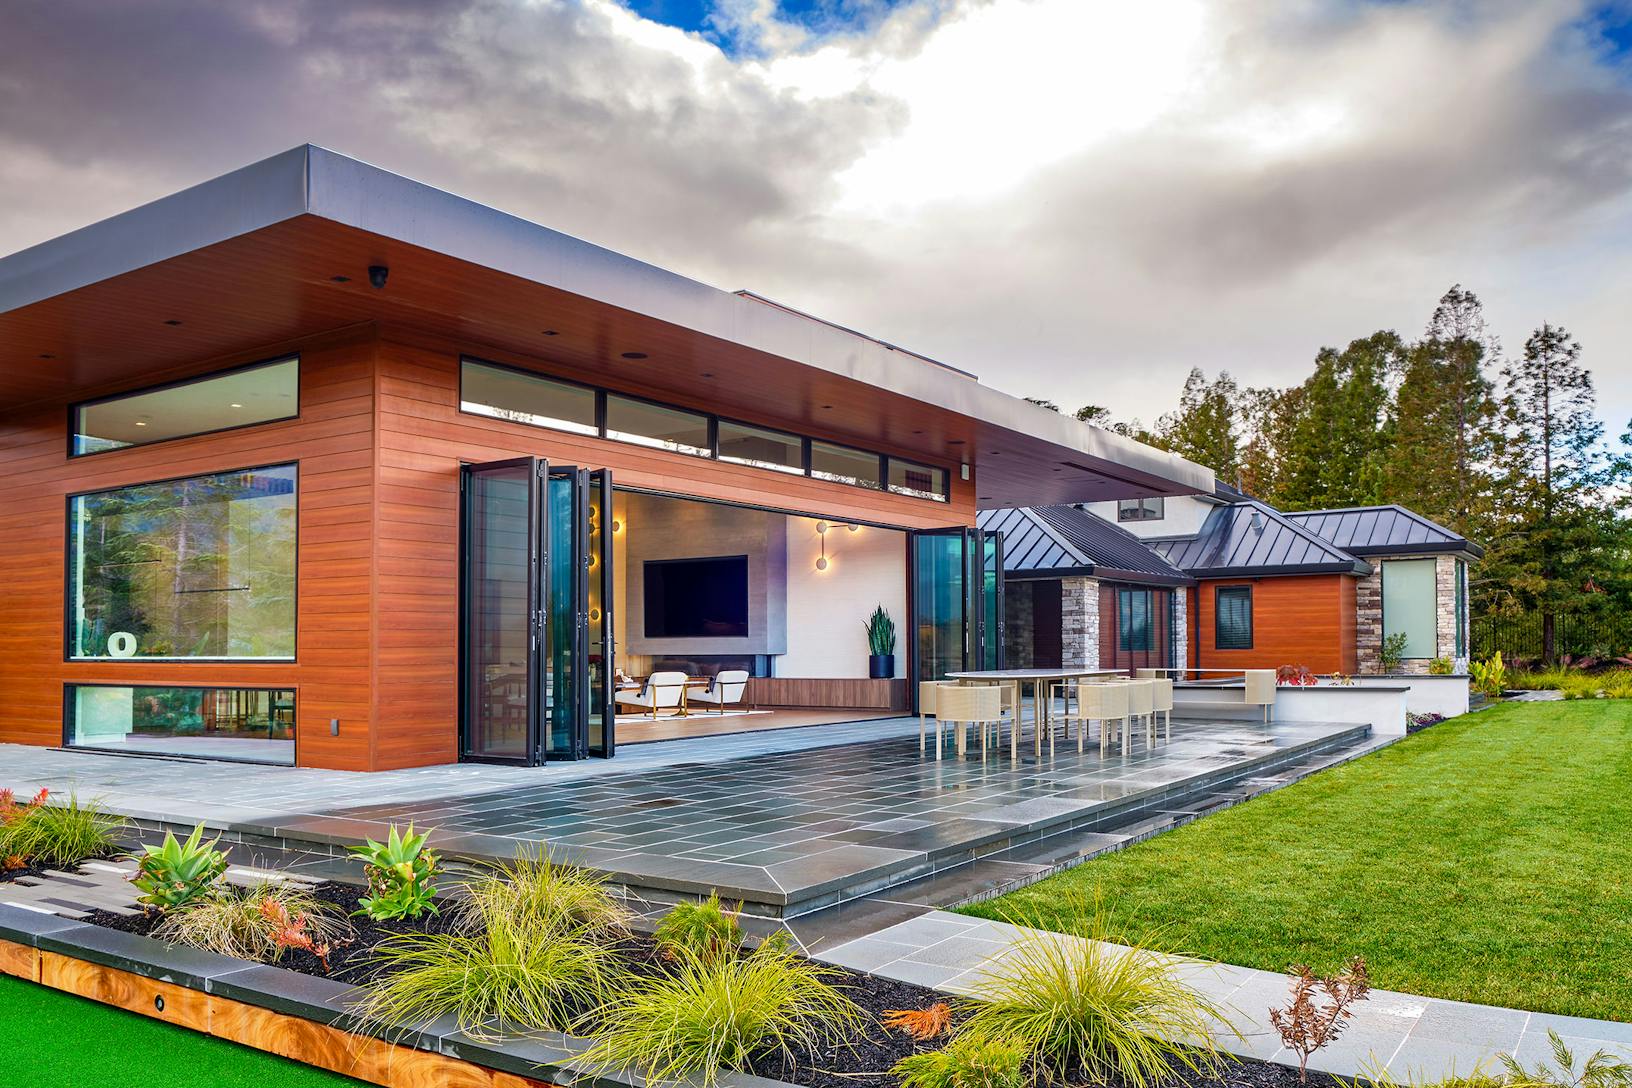 Contemporary house with Generation 4 bifold glass walls embracing a green lawn